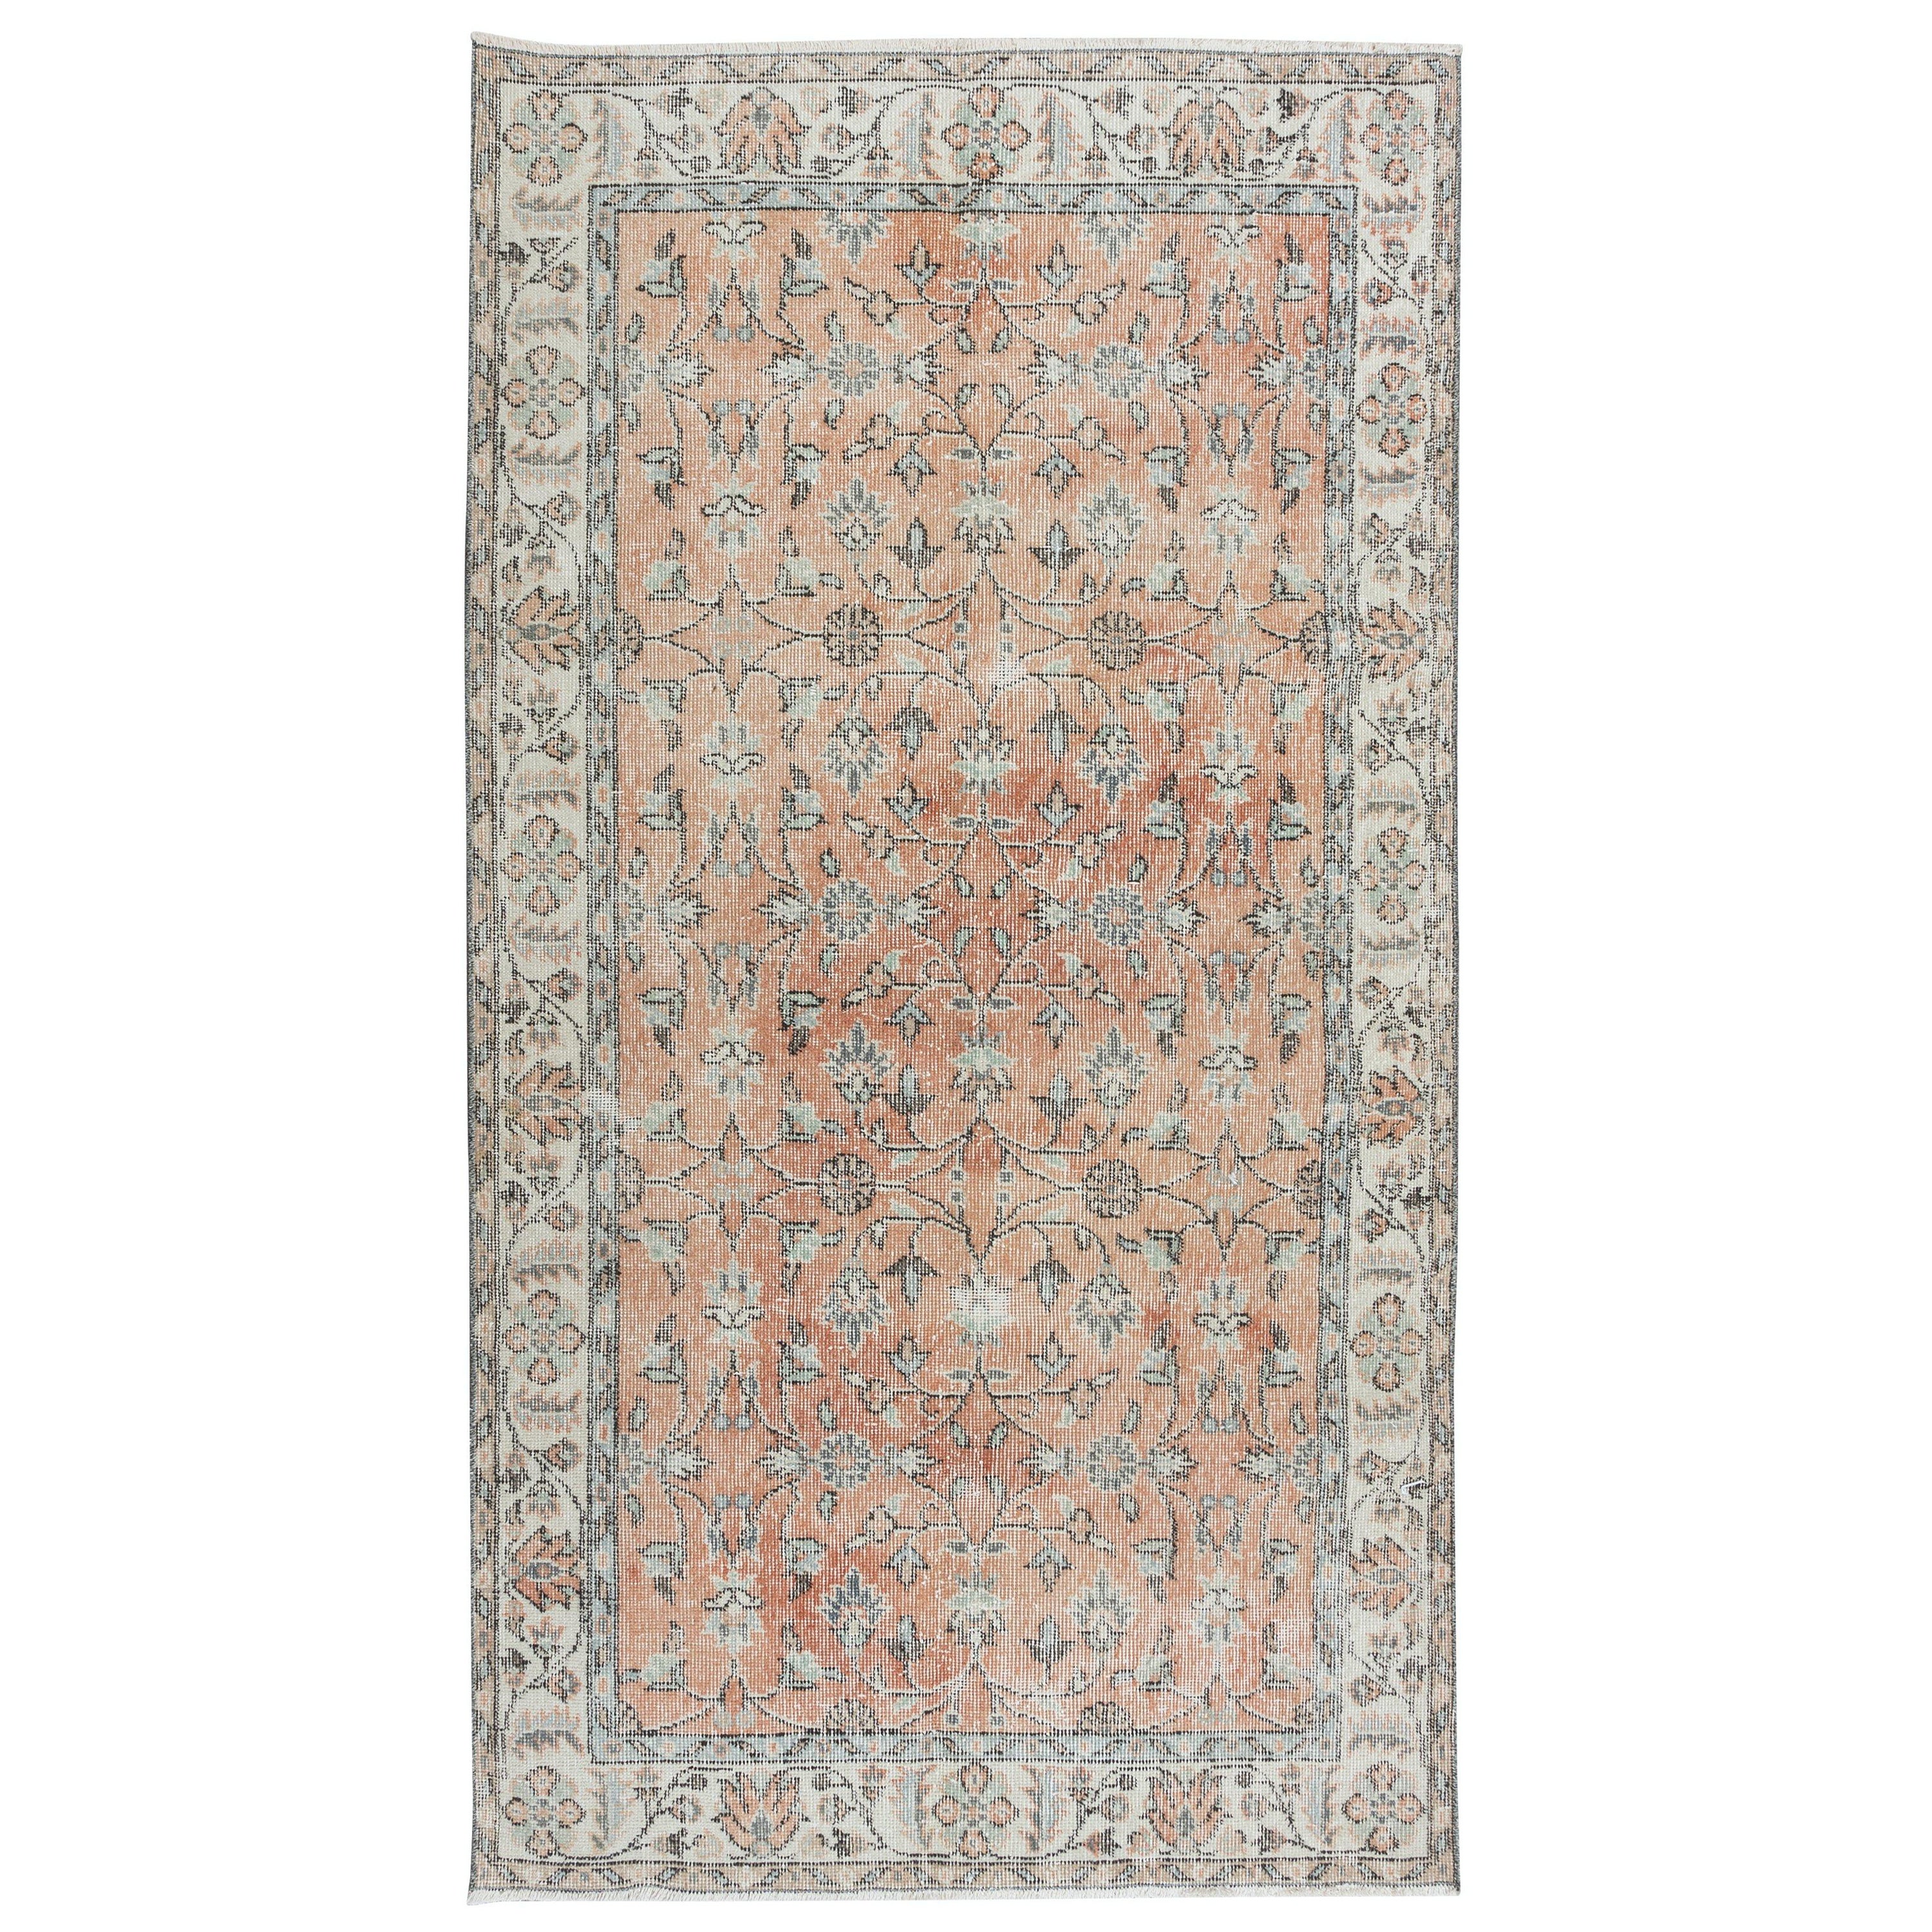 4x7 Ft Romantic Vintage Handmade Rug in Soft Red & Beige with Botanical Design For Sale